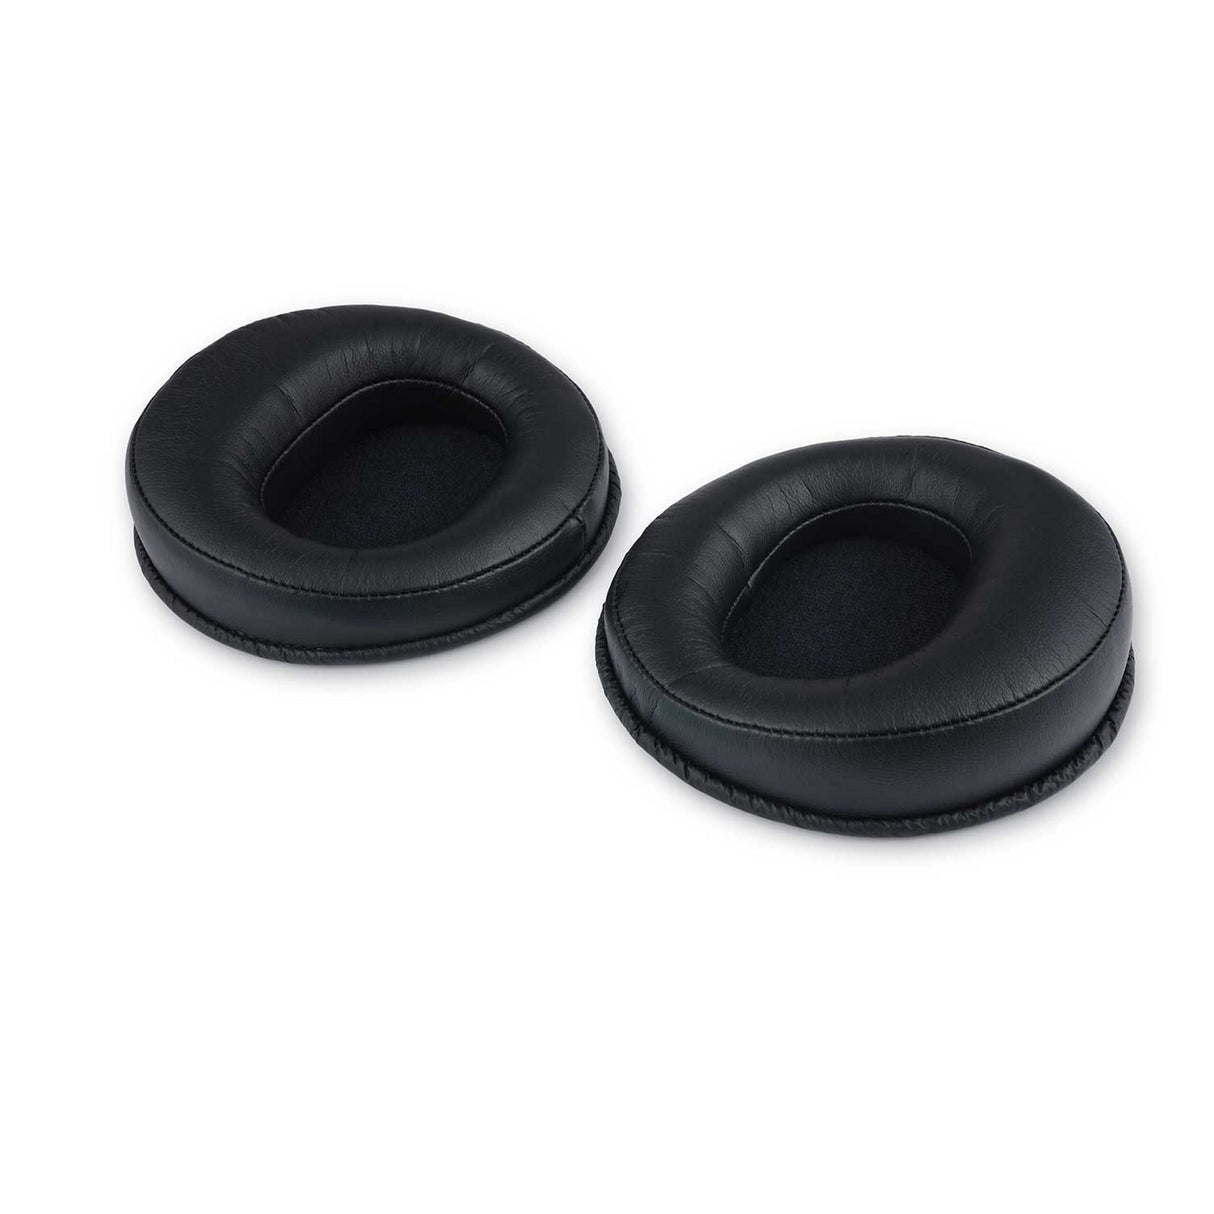 Fostex EX-EP-61 Replacement Ear Pads for TH-610